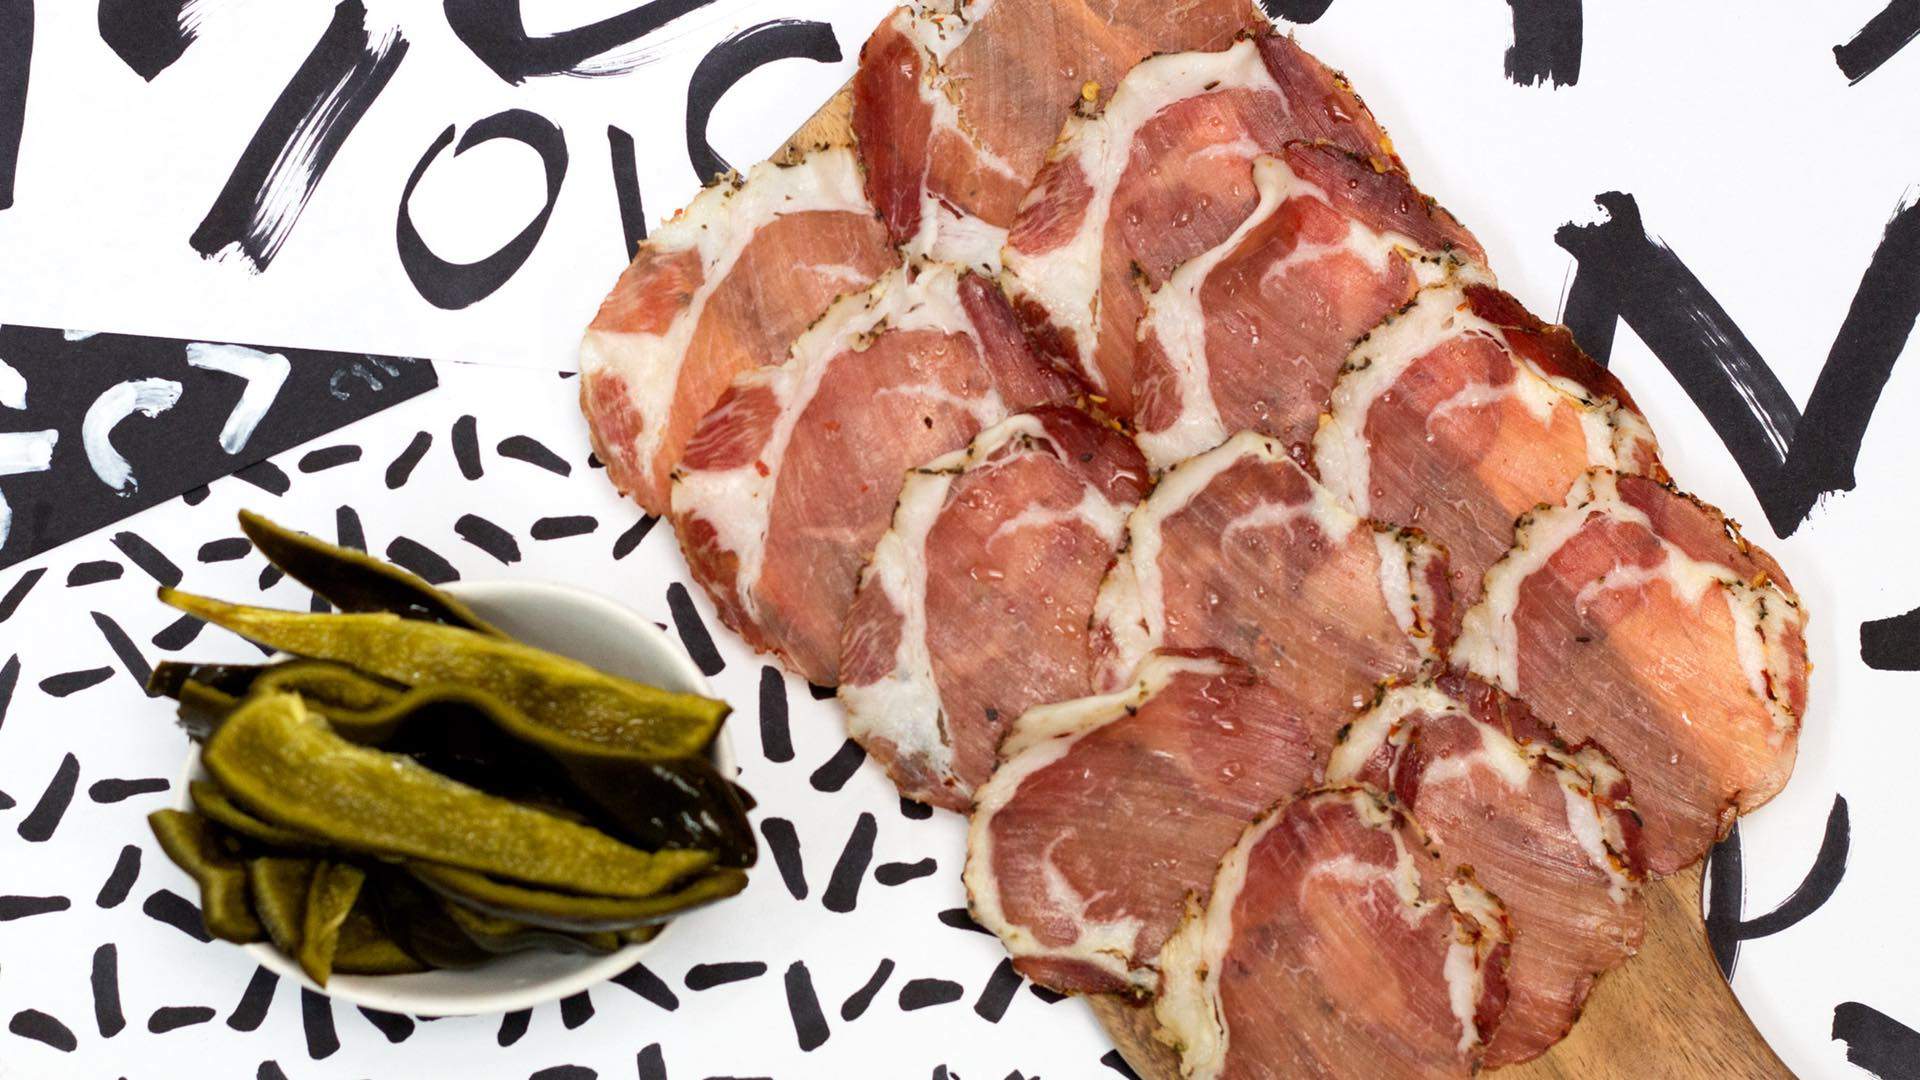 White Label Supper Club Will Deliver Cheese And Charcuterie To Your Door